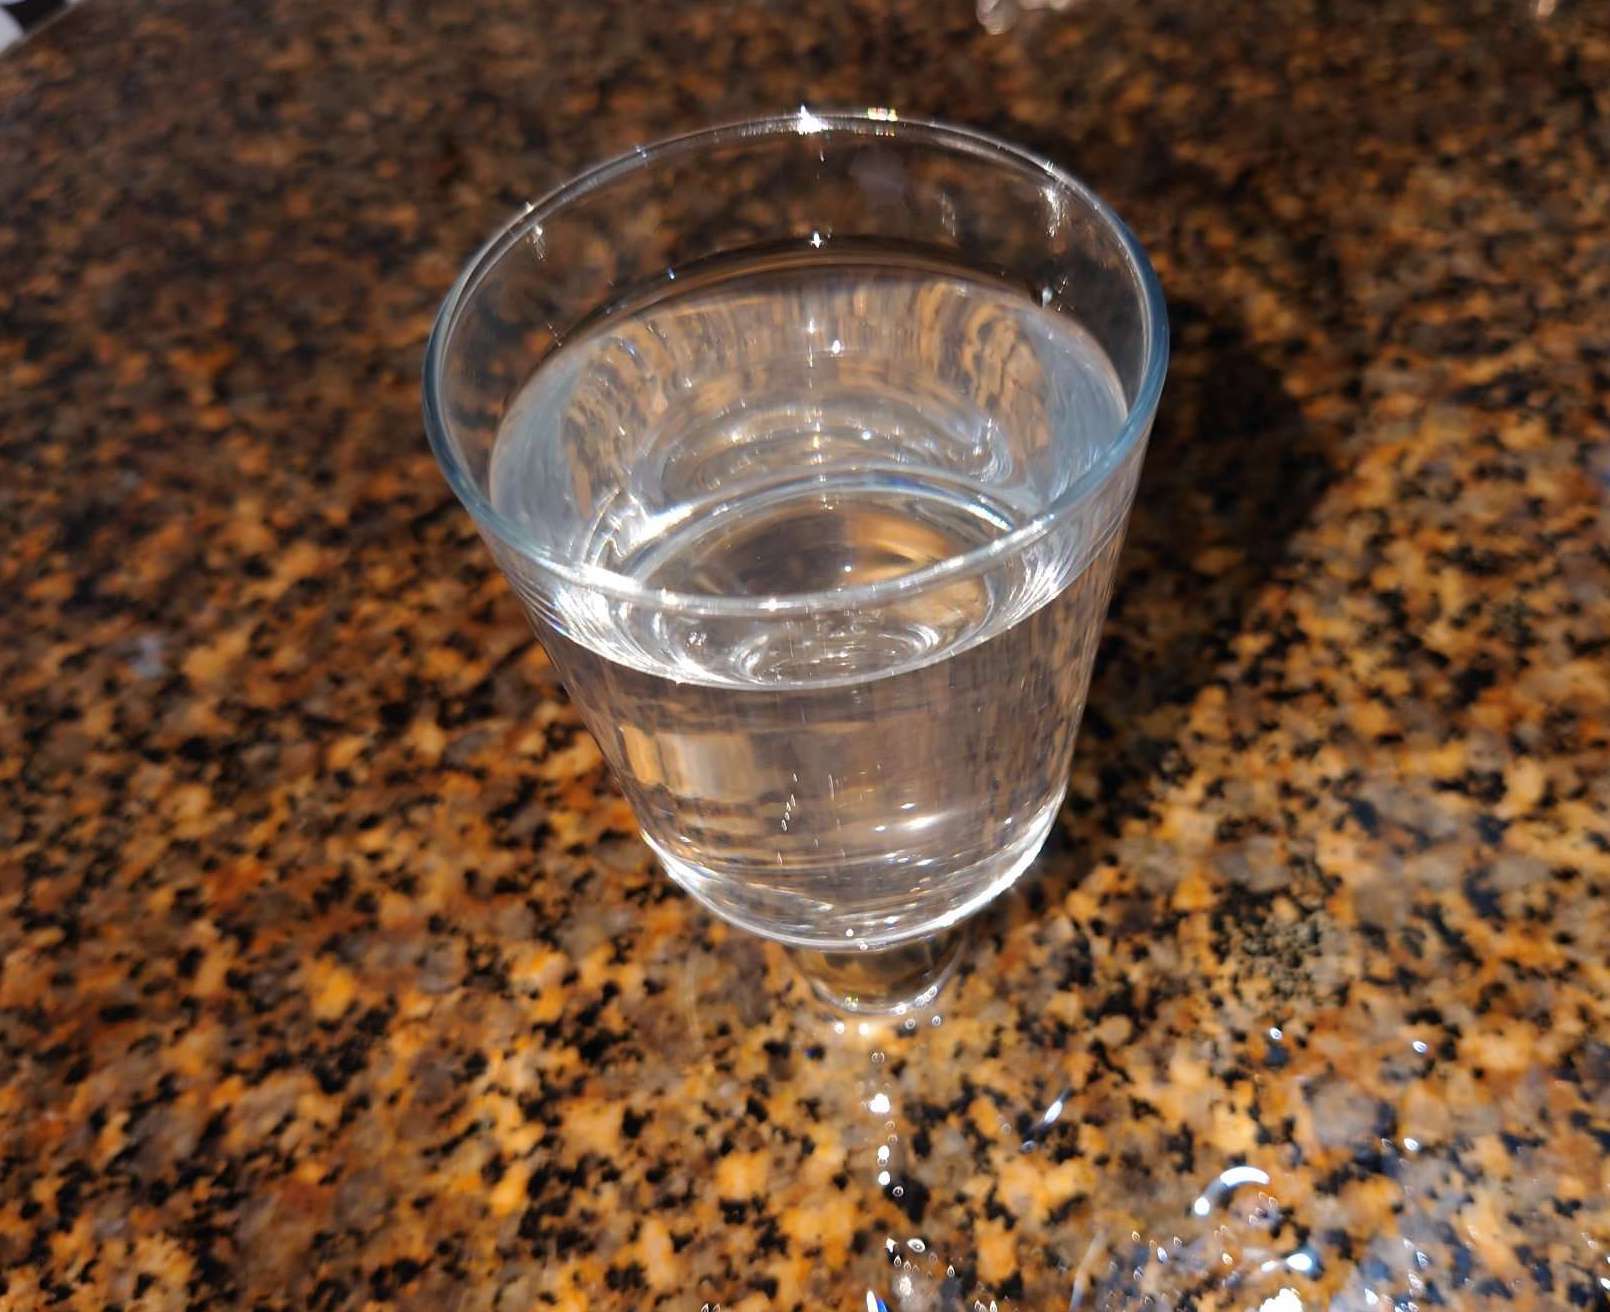 Collect the Distilled Water in Glass